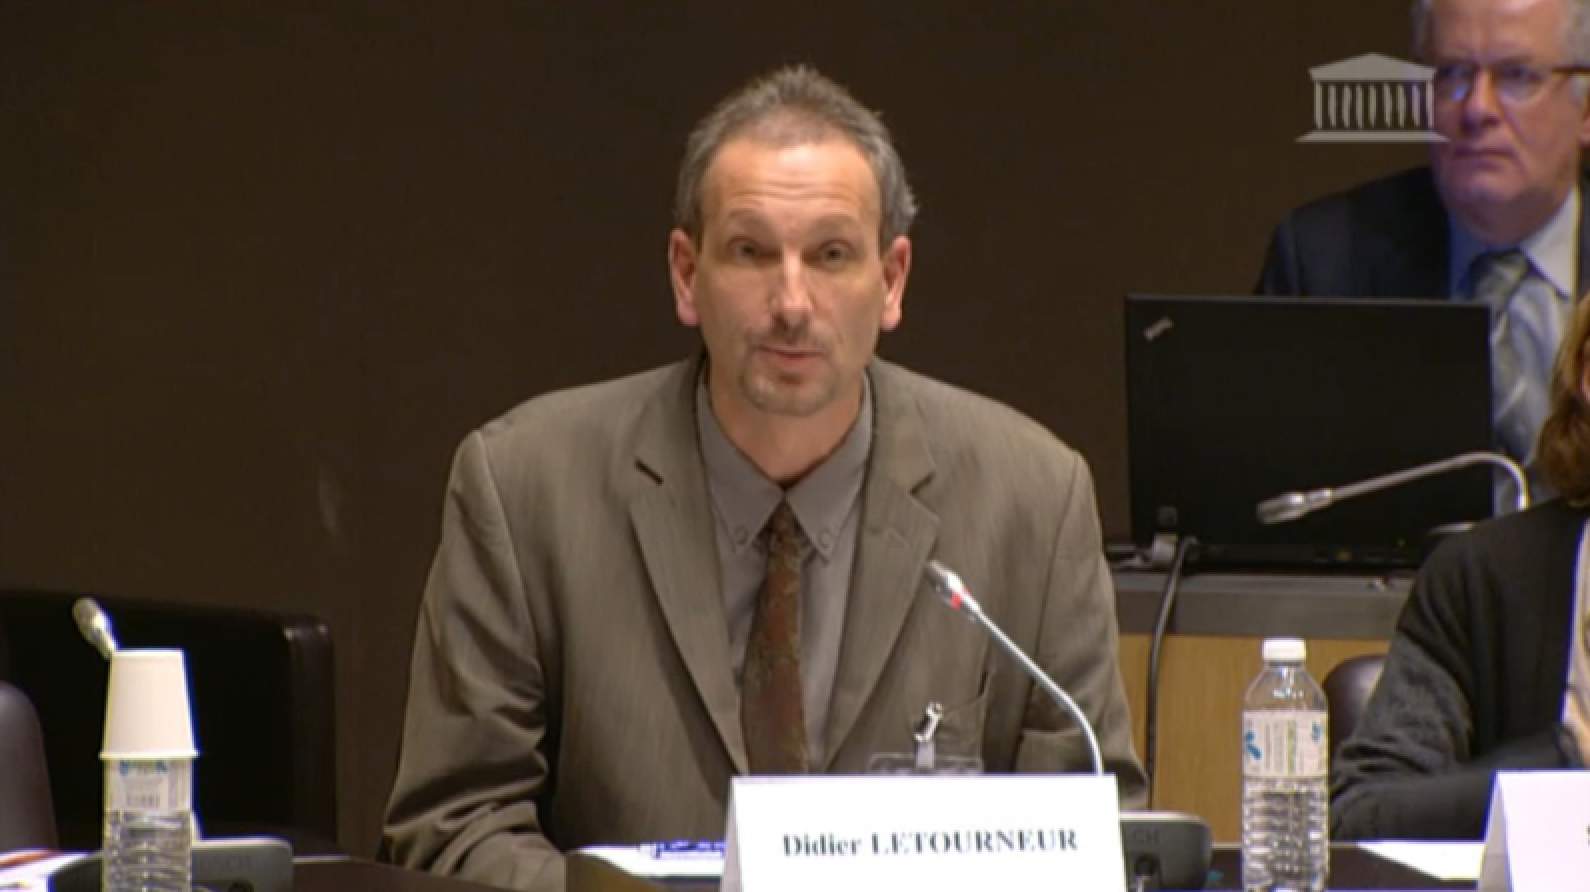 Didier Letourneur at the French Parliament